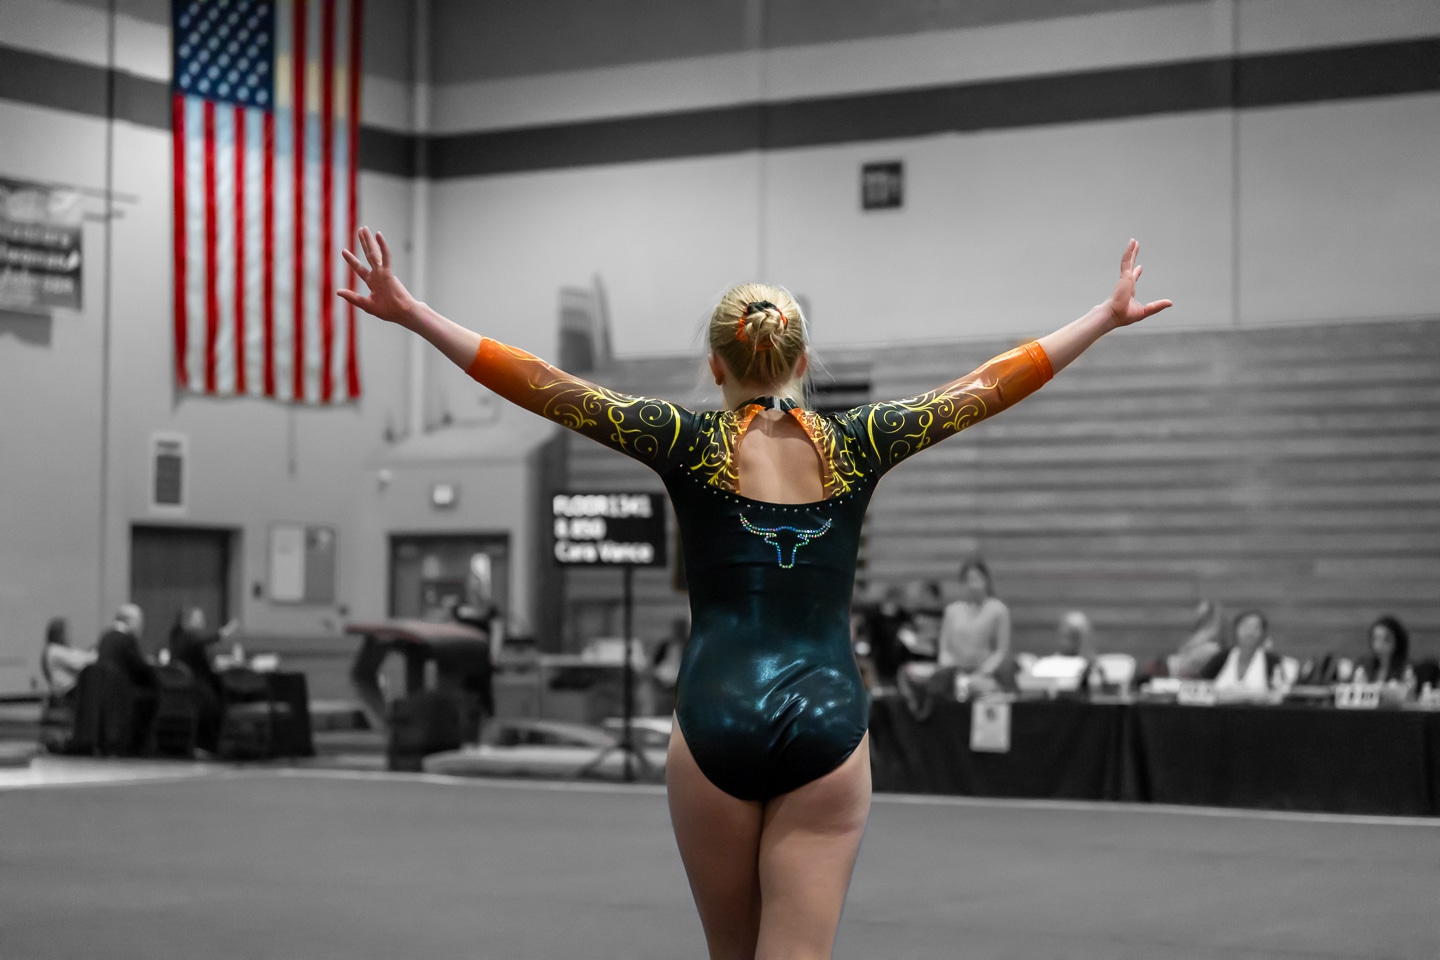 Female gymnast finishing her routine with a confident pose in front of the American flag at a gymnastics competition.